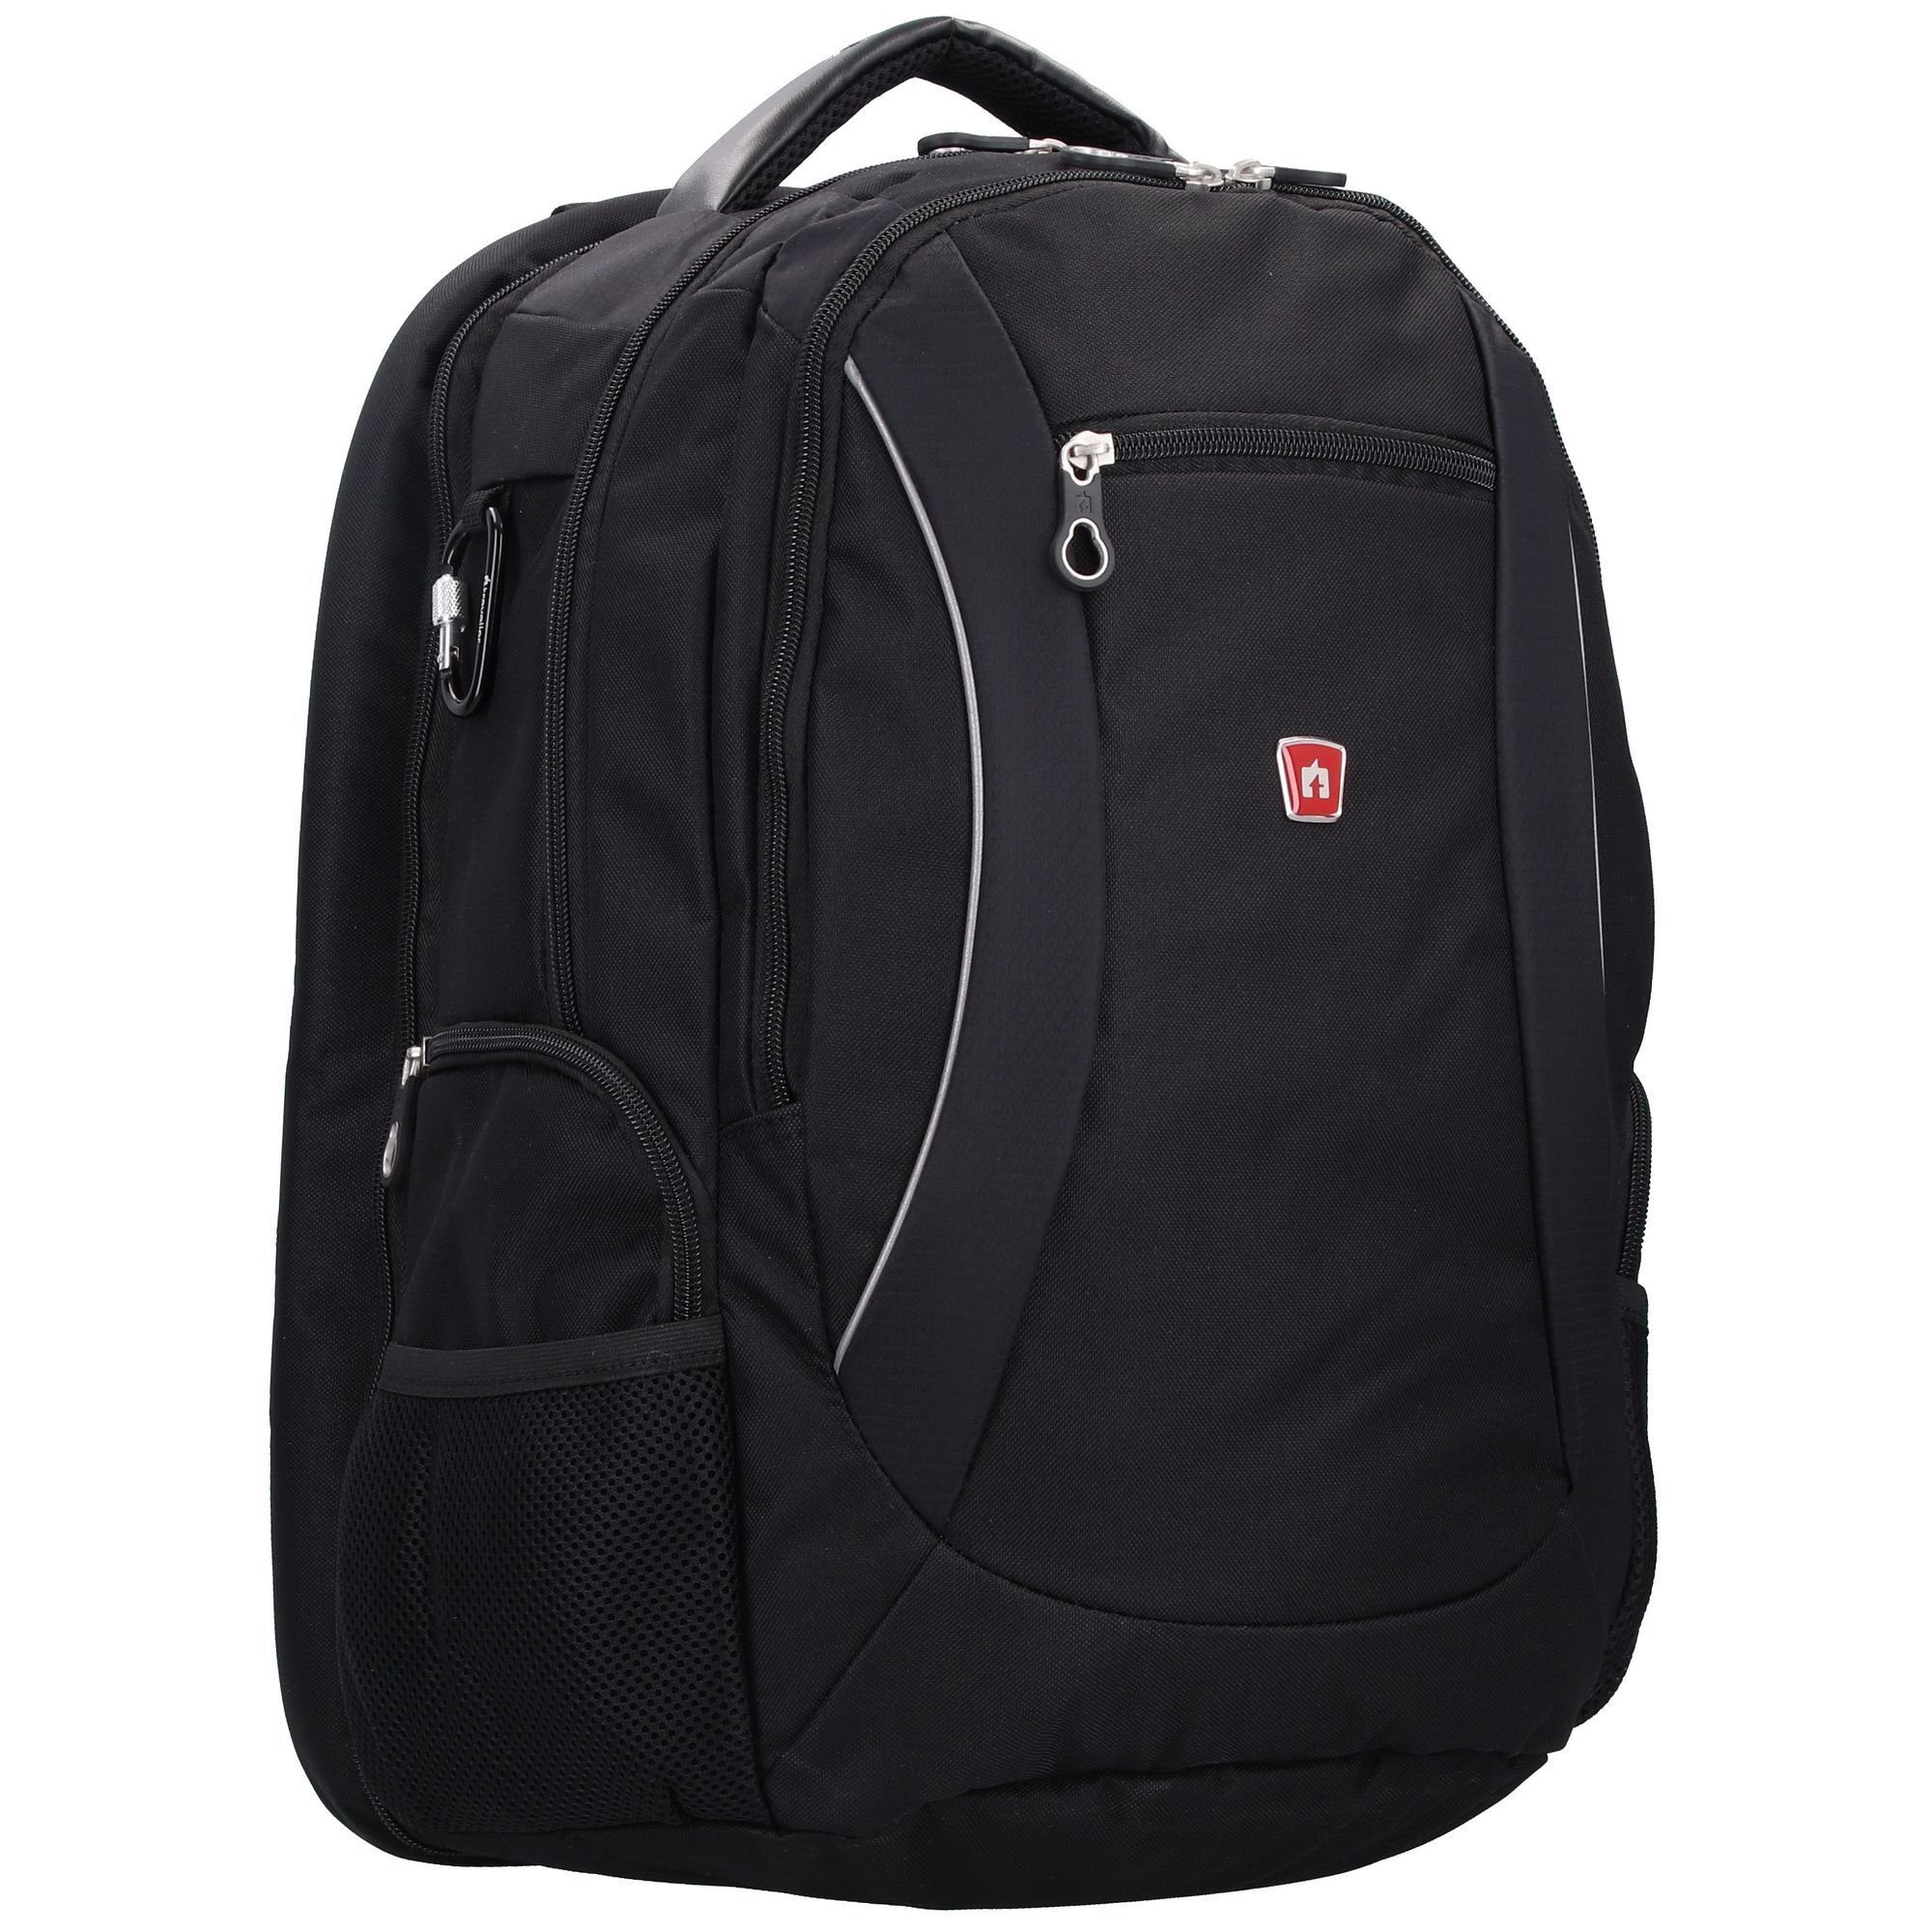 Polyester Daypack PROfessional, Traveller